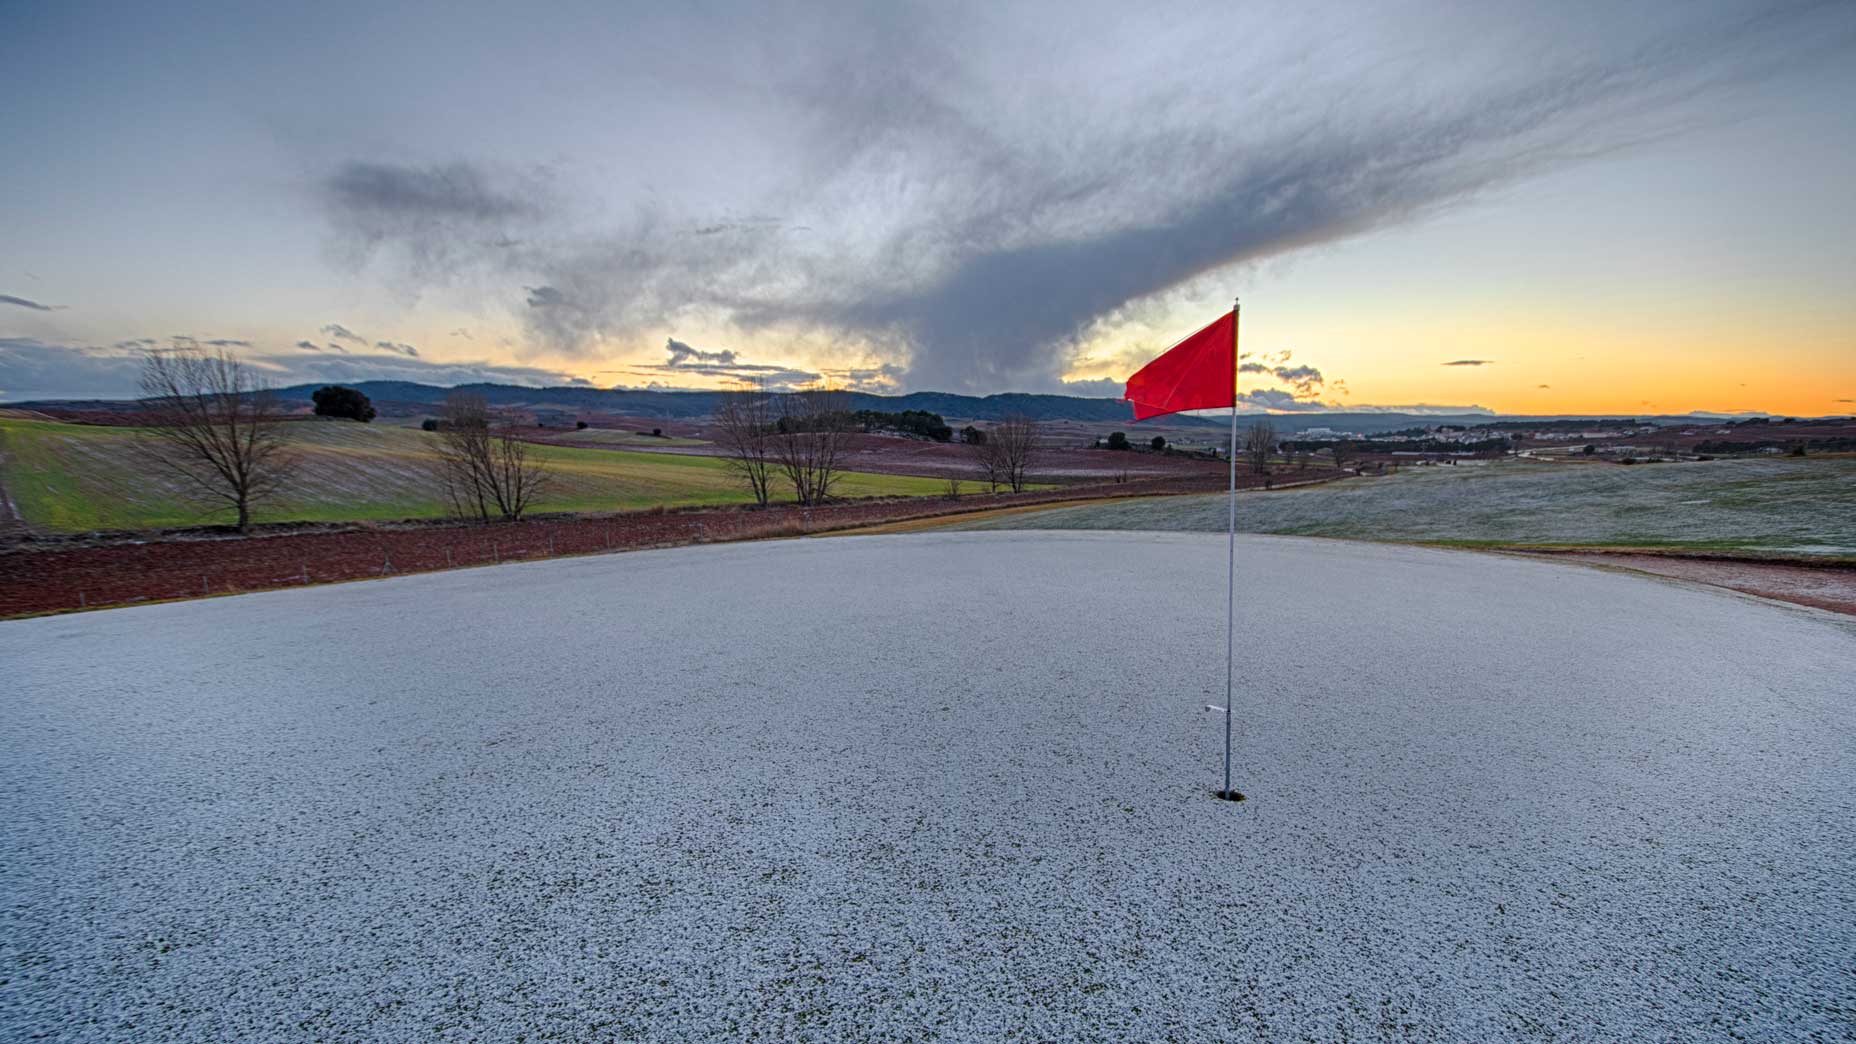 Winter Golf Tips: 8 Ways to Play your Best in the Cold - The Left Rough